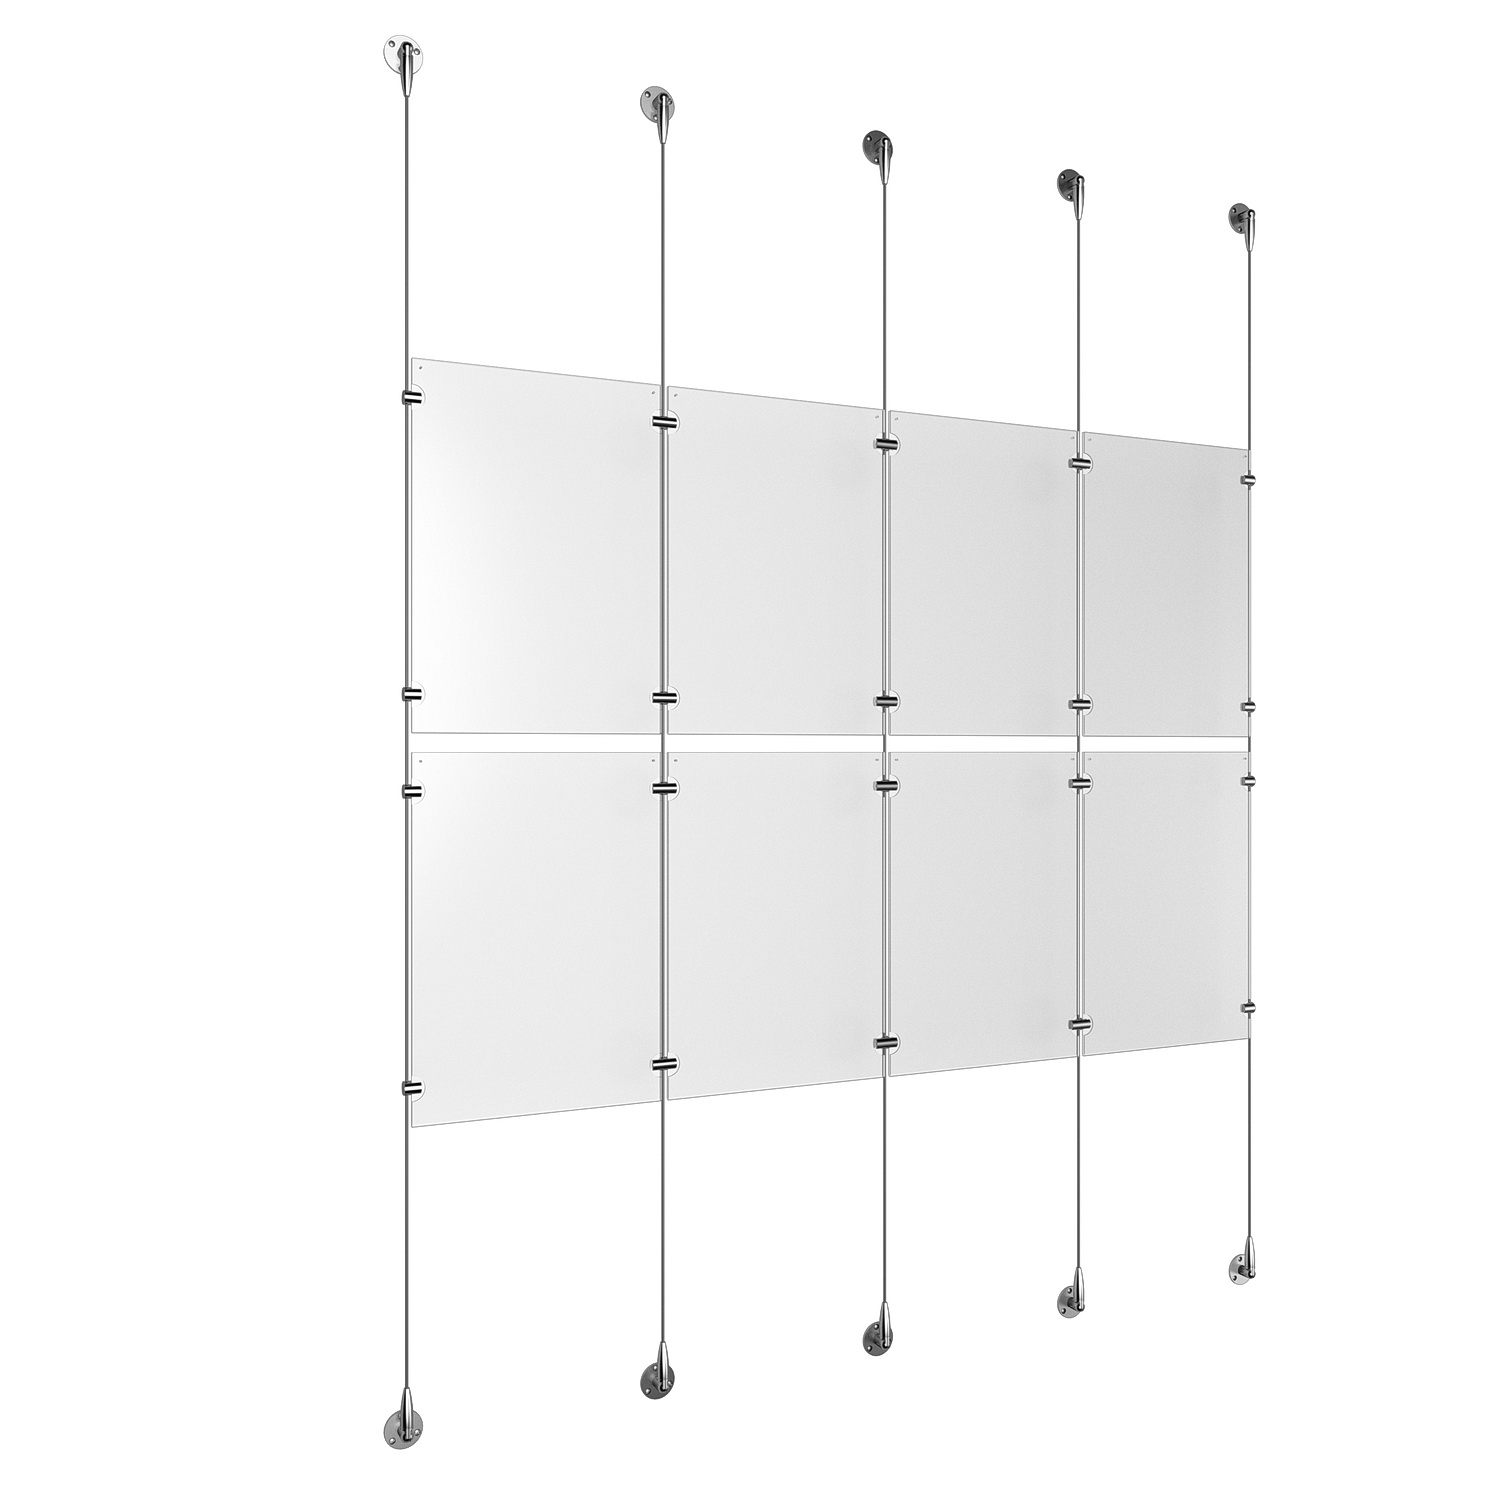 (8) 11'' Width x 17'' Height Clear Acrylic Frame & (5) Stainless Steel Satin Brushed Adjustable Angle Signature 1/8'' Cable Systems with (8) Single-Sided Panel Grippers (12) Double-Sided Panel Grippers